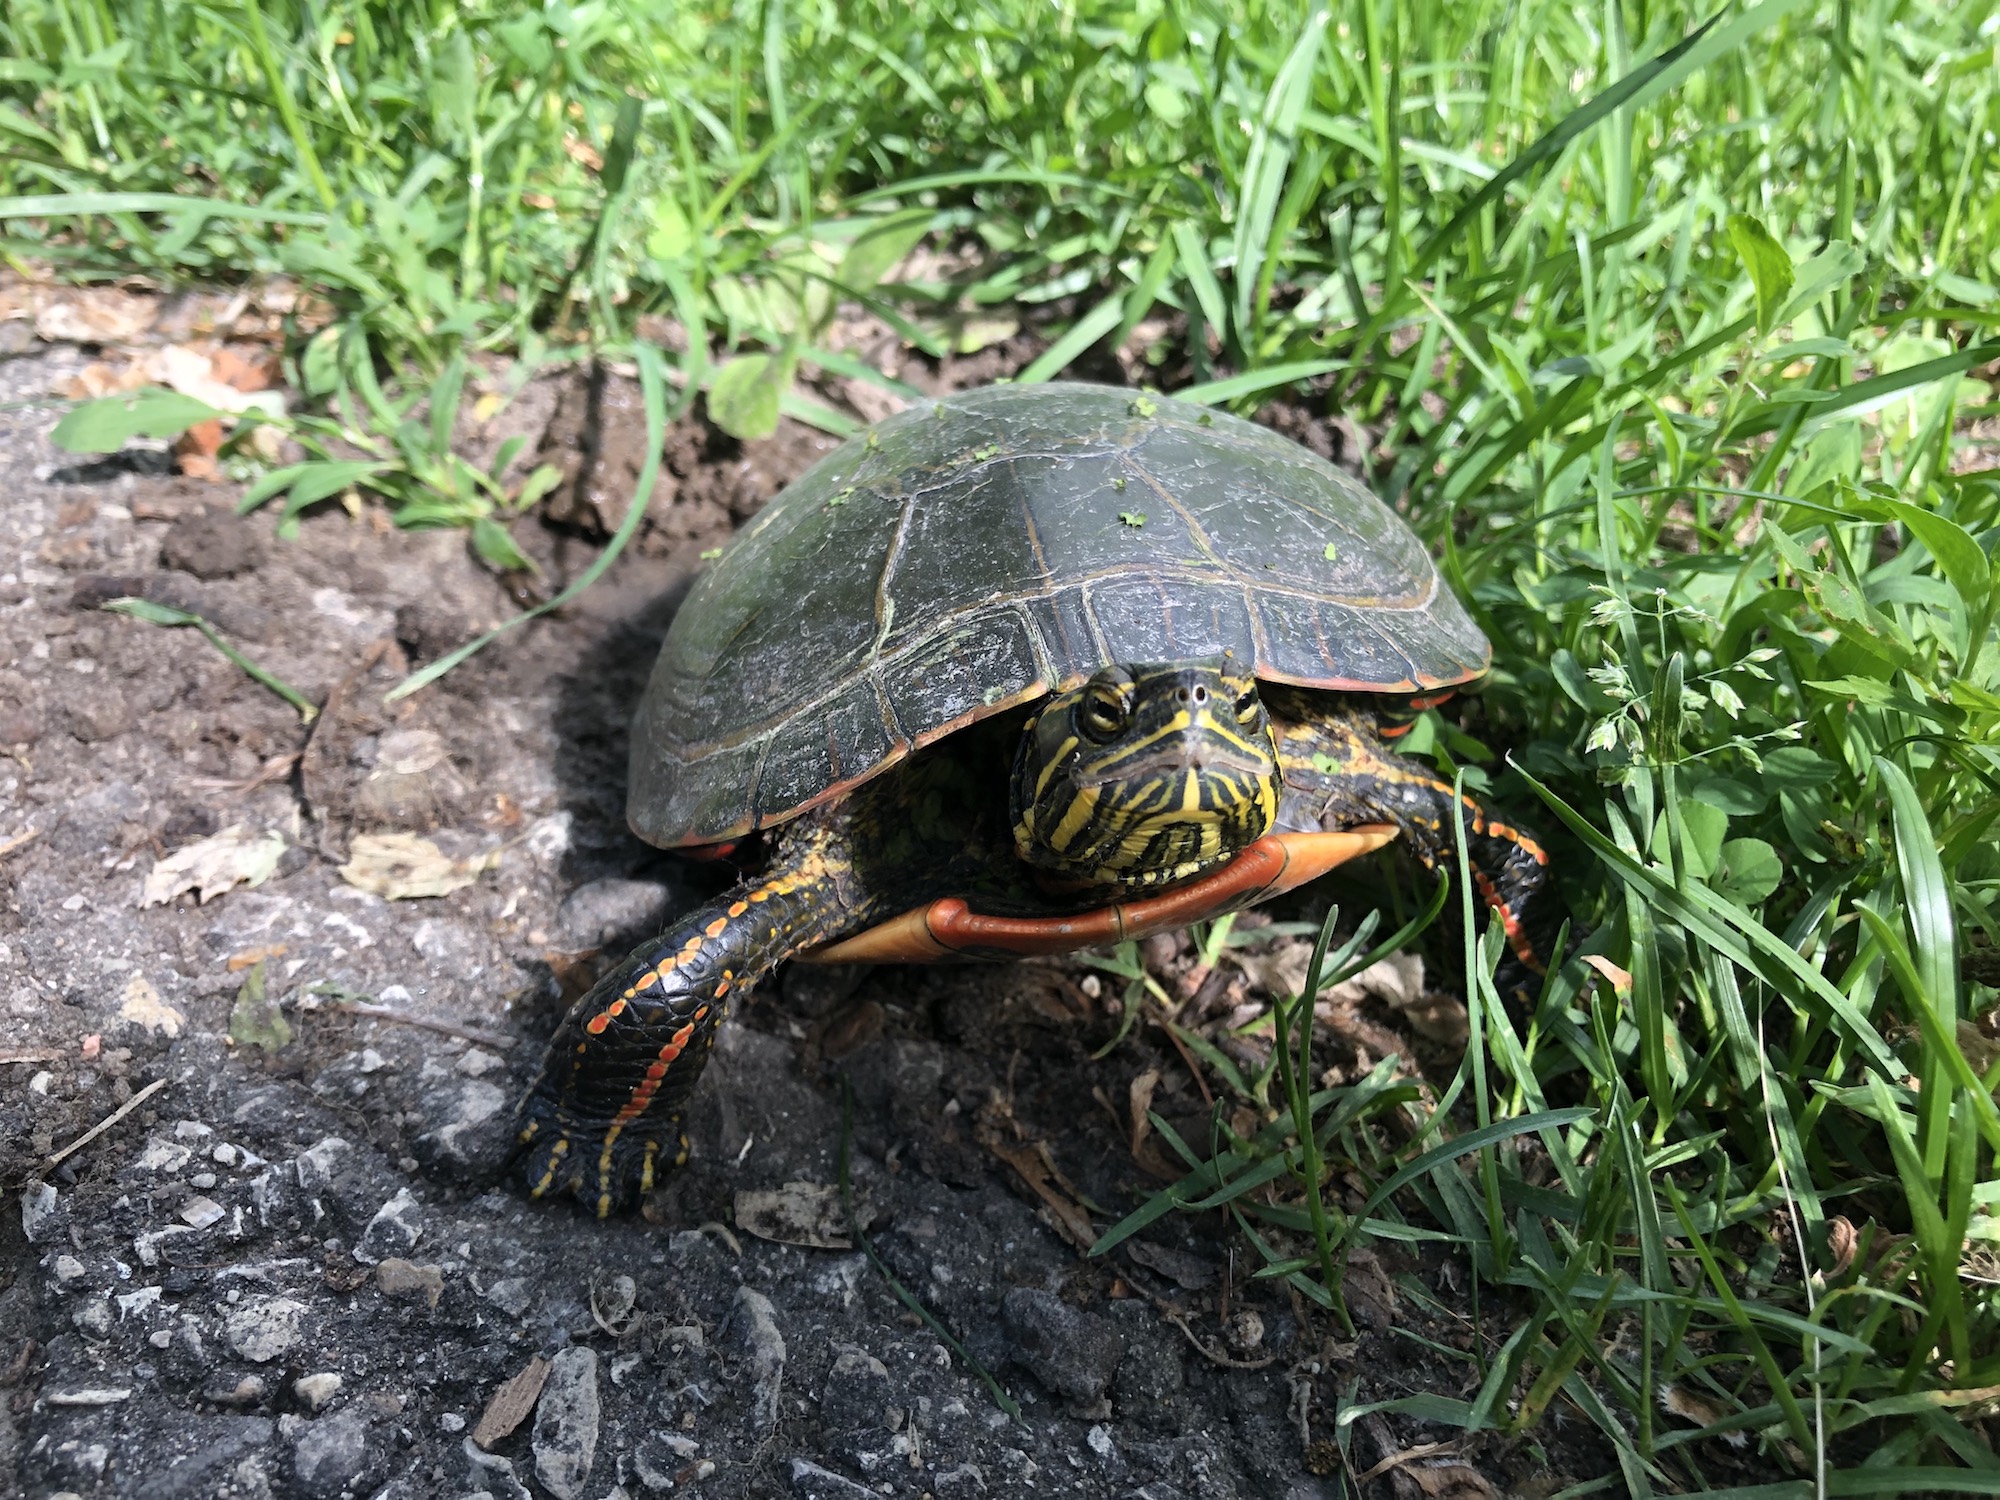 Painted Turtle laying eggs in Oak Savanna along bike path in Madison, Wisconsin on June 8, 2019.